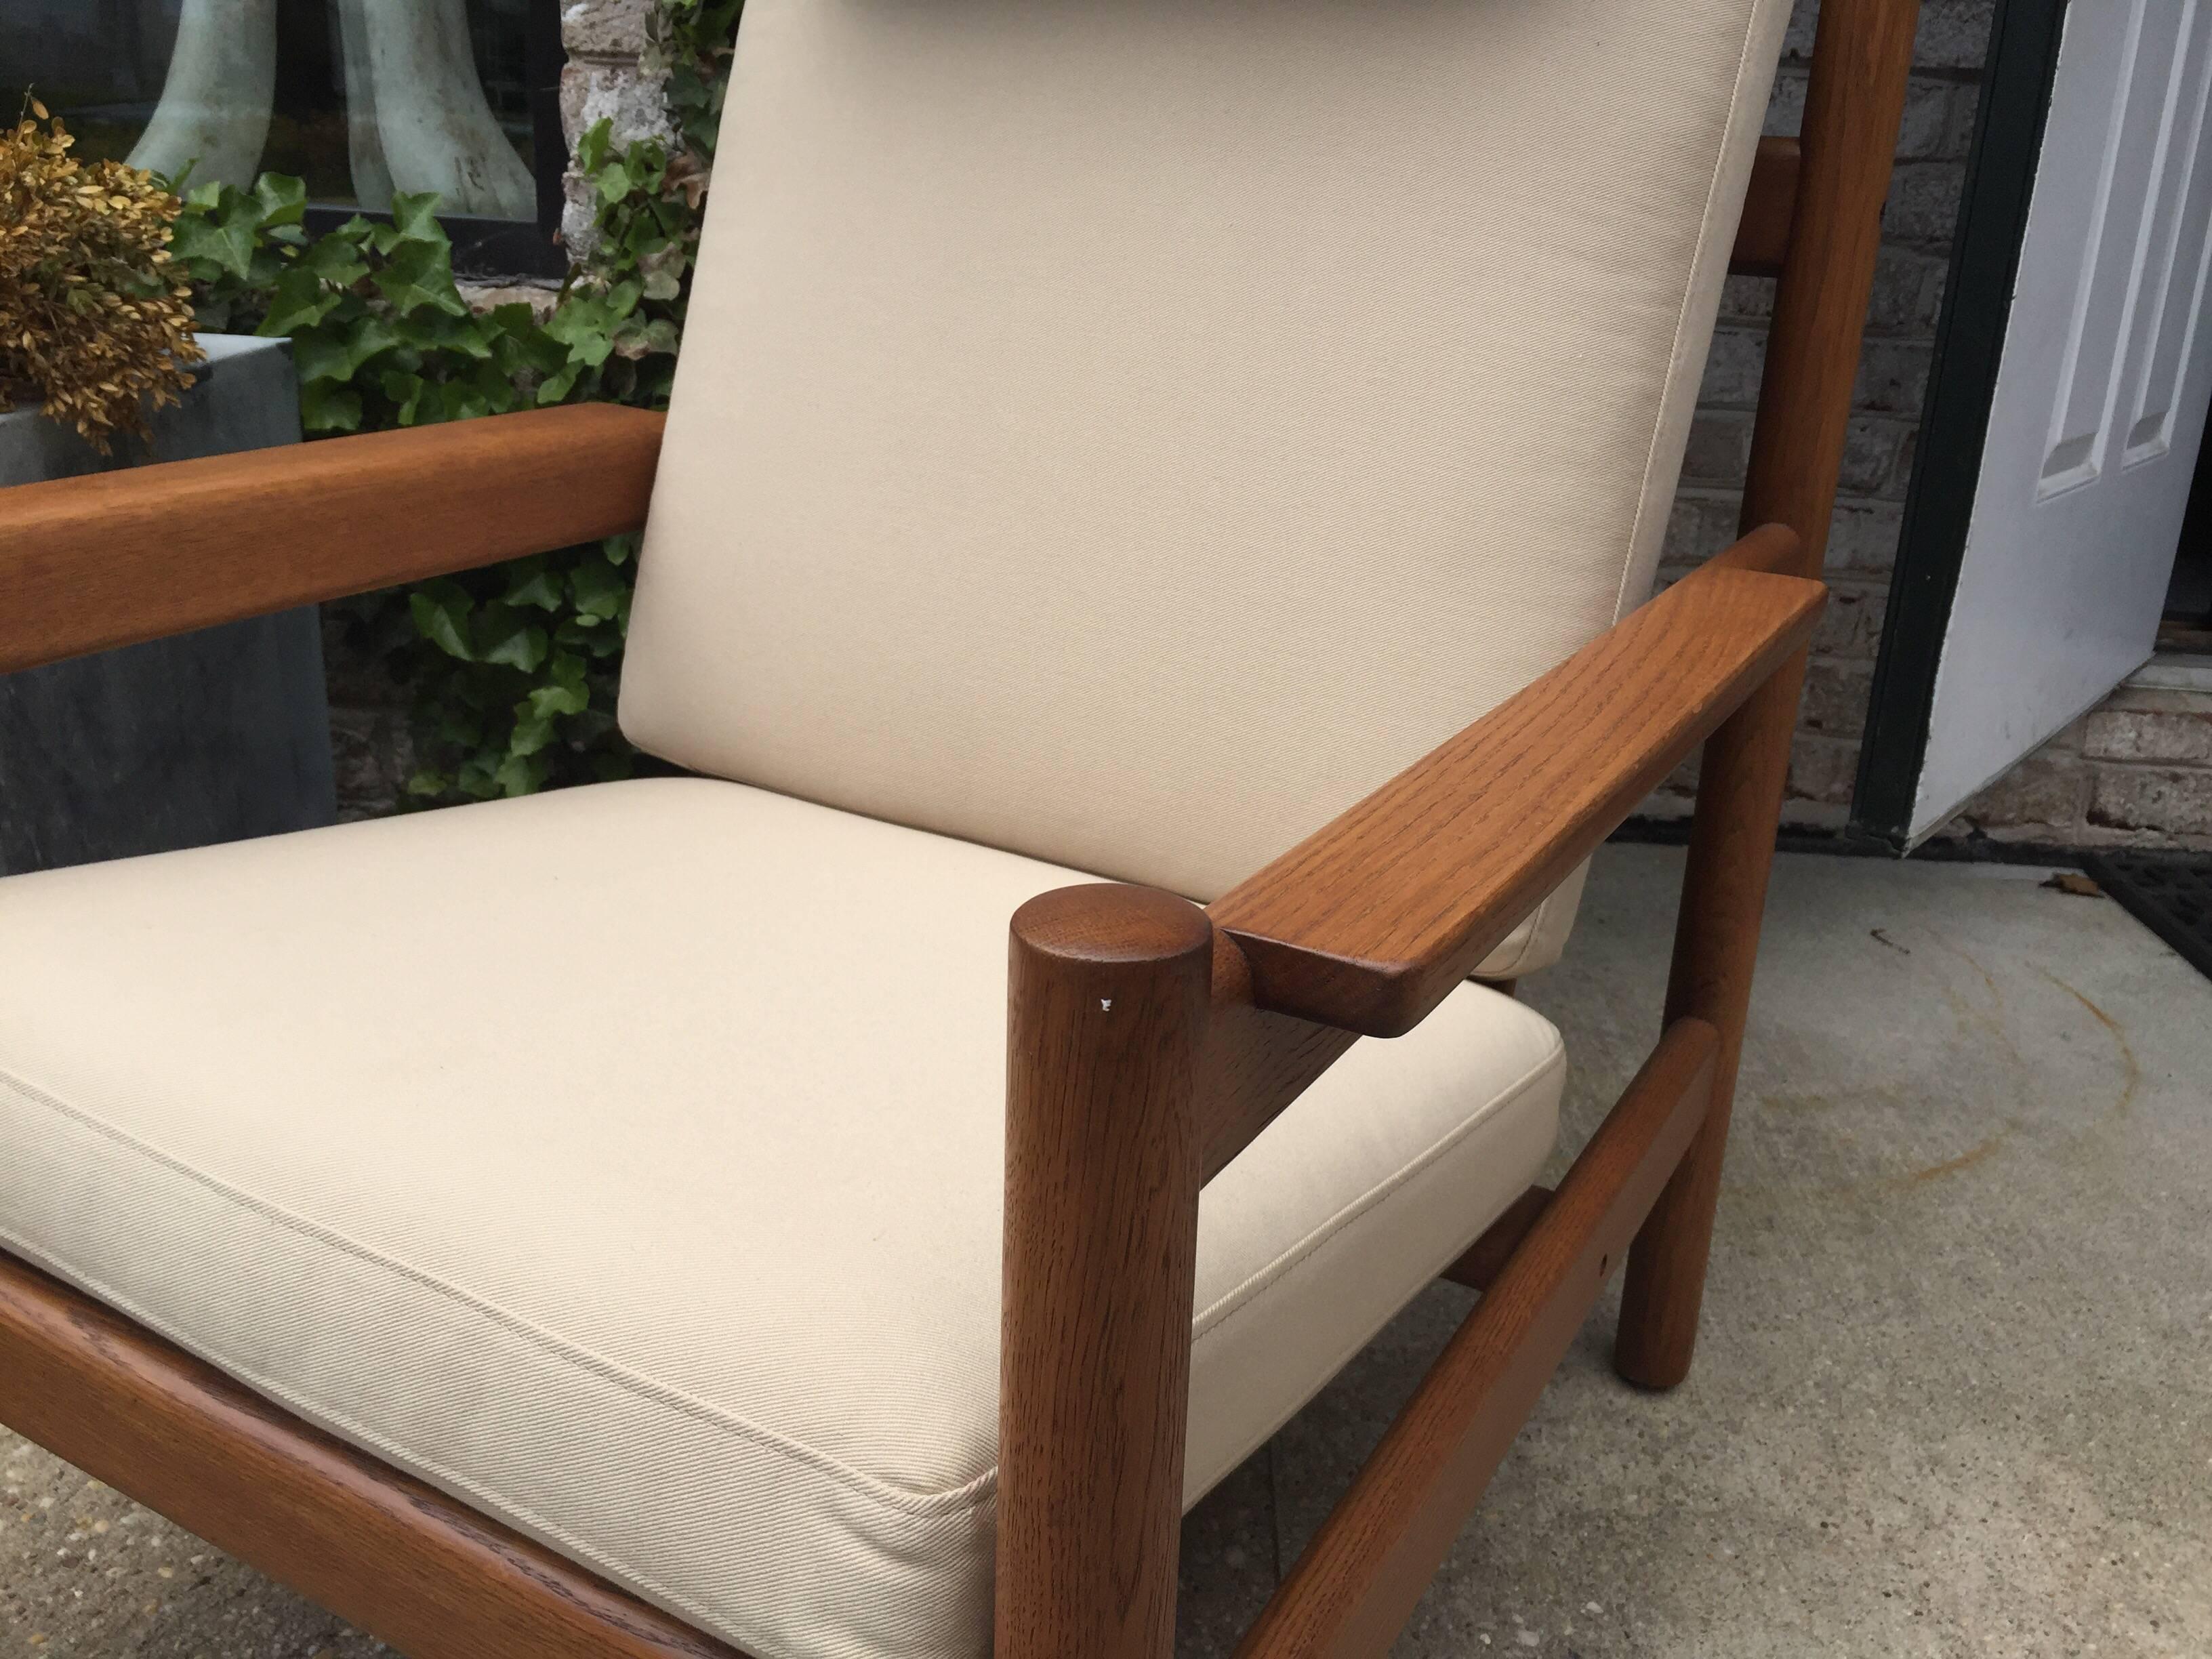 Rare Vintage Arne Norell Teak Armchair and Ottoman with Leather Straps In Good Condition For Sale In East Hampton, NY